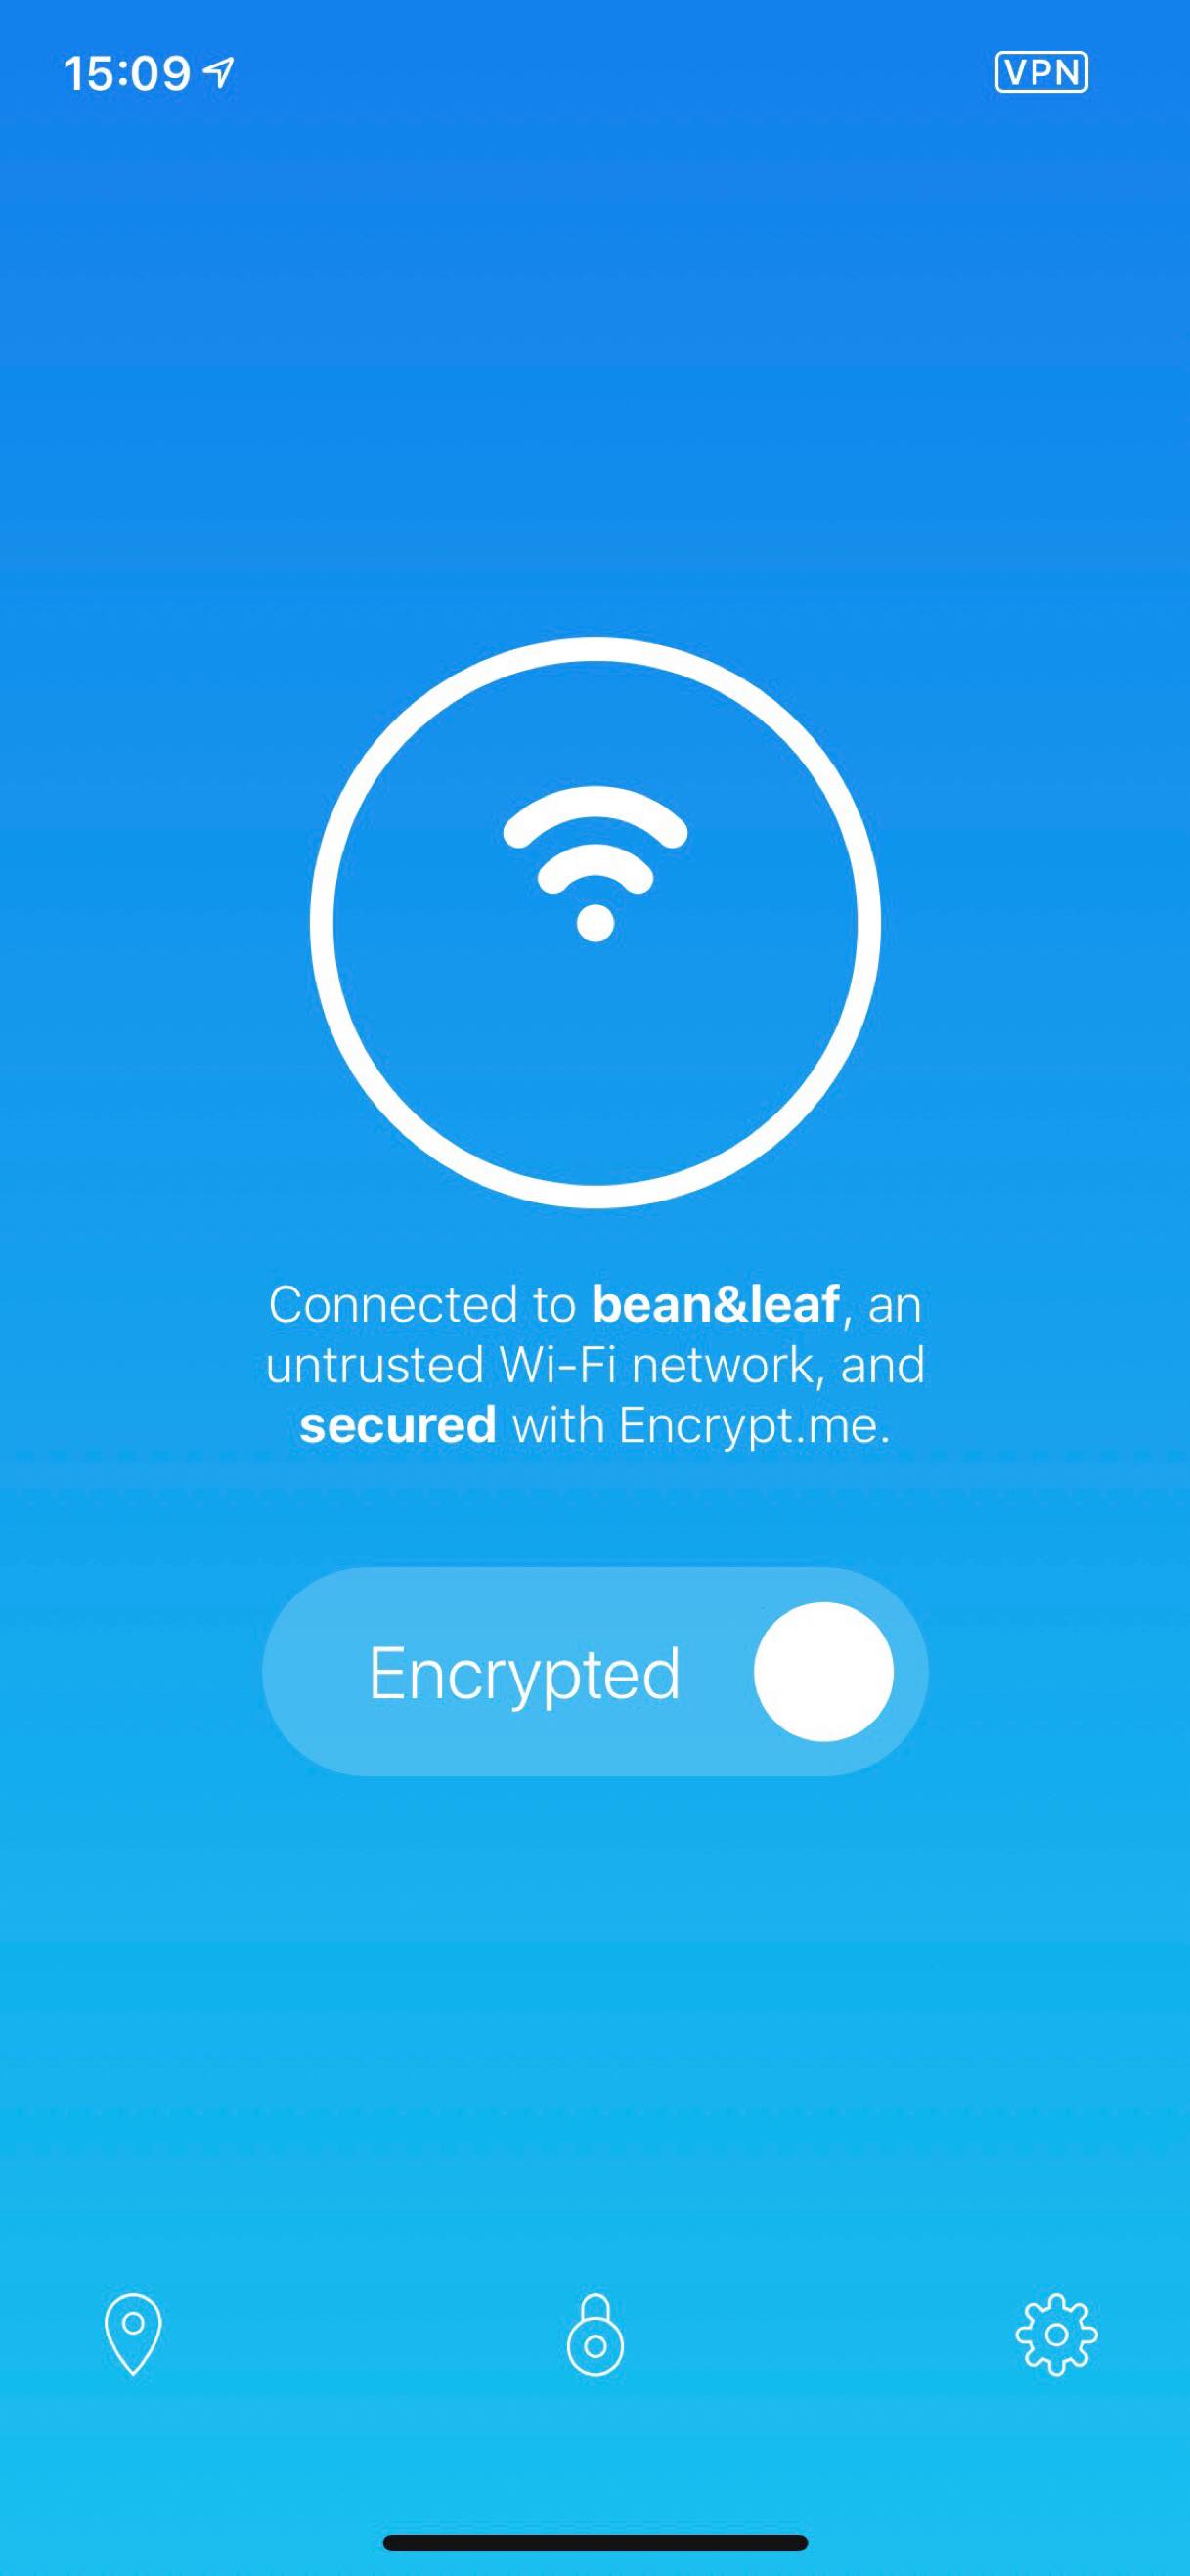 The interface for Encrypt.me, with a blue background, a WiFi symbol and text that reads: “Connecte to bean&amp;leaf, an untrusted Wi-Fi network, and secured with Encrypt.me. There is also switch control that reads Encrypted and three icons at the bottom of the screen for choosing server locations (a pin icon), network settings (a lock icon), and account settings (a gear icon).